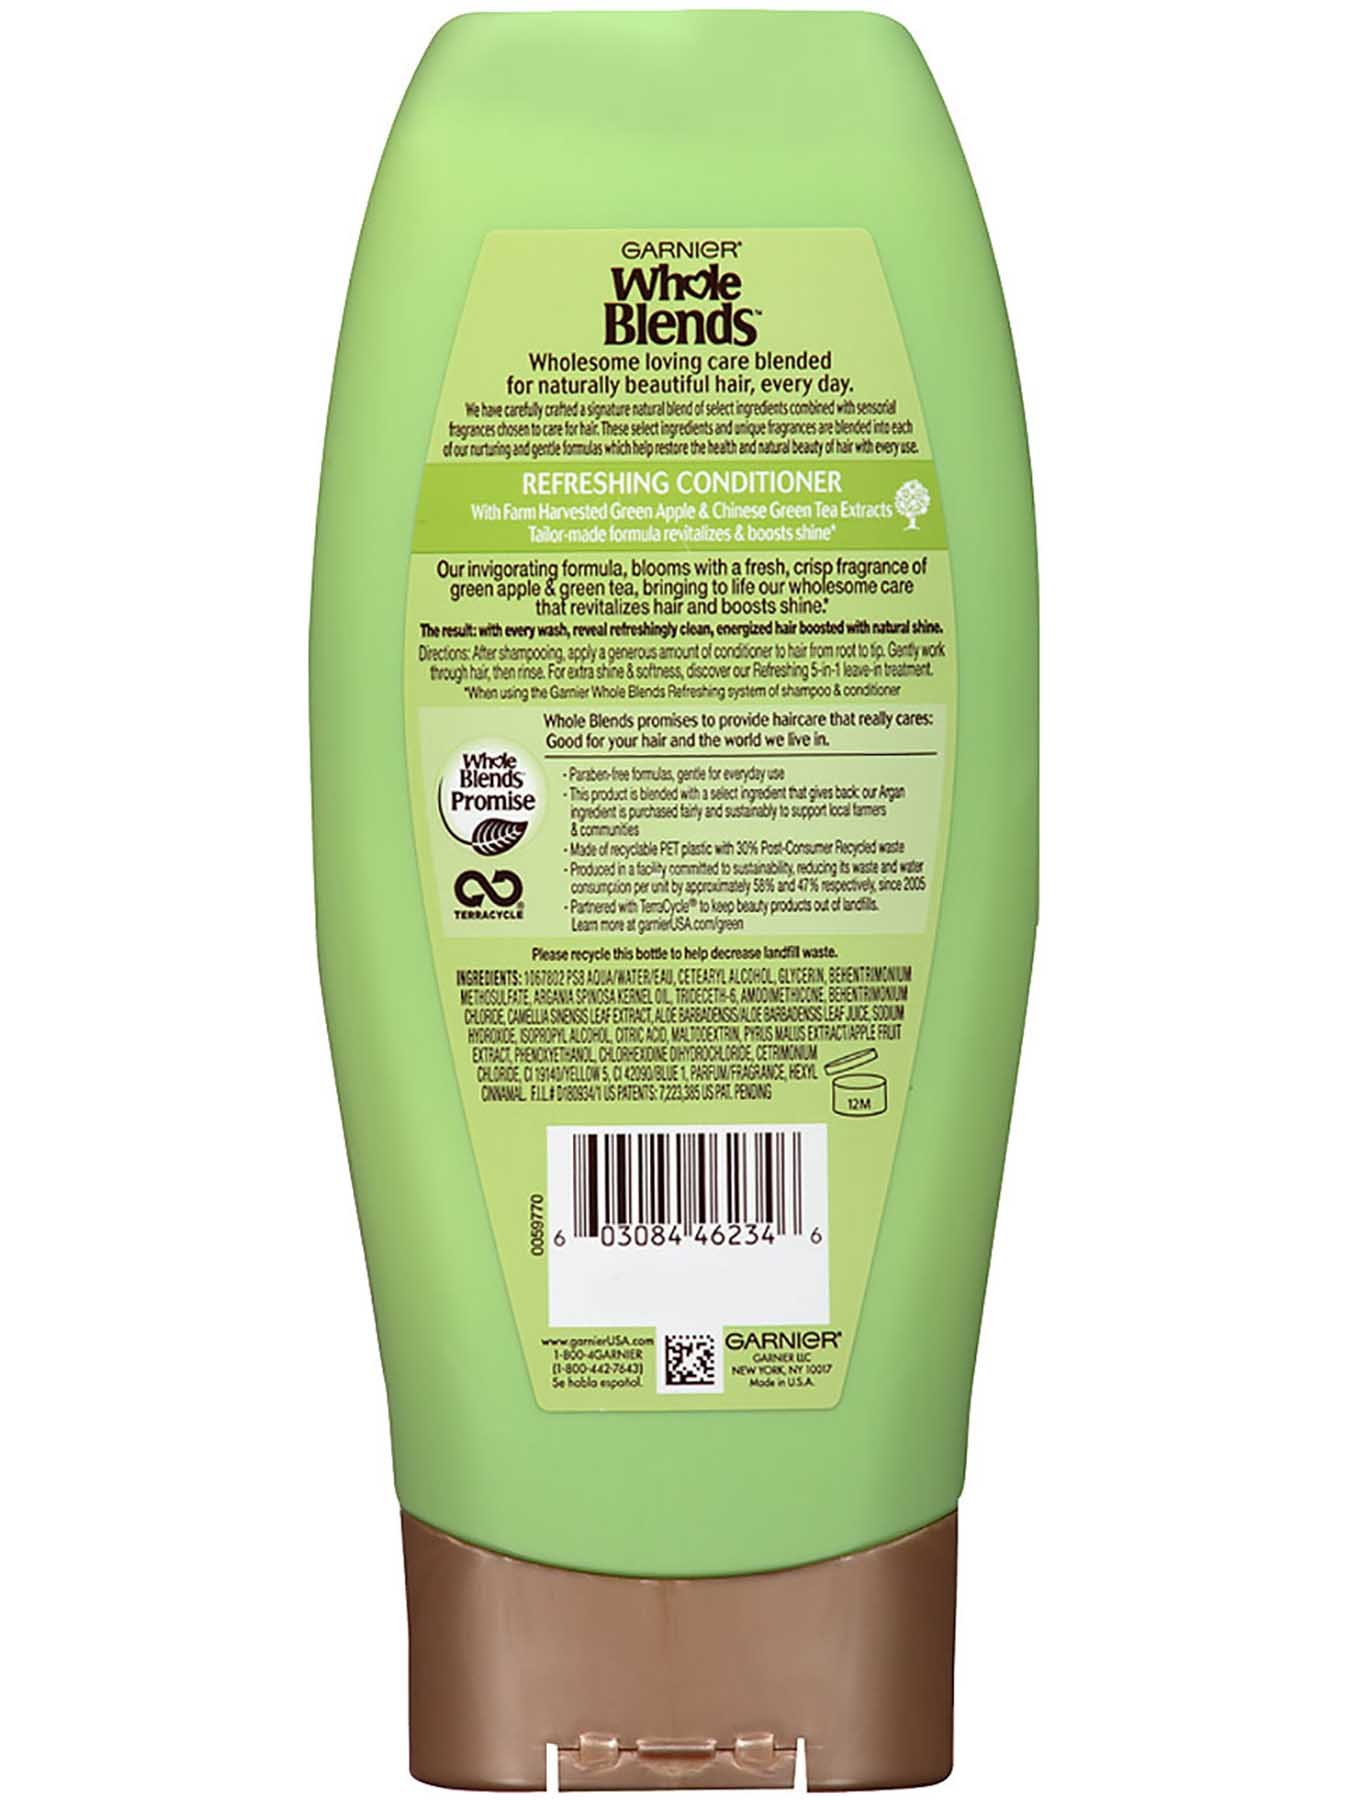 Back view of Refreshing Conditioner with Green Apple and Green Tea Extracts.